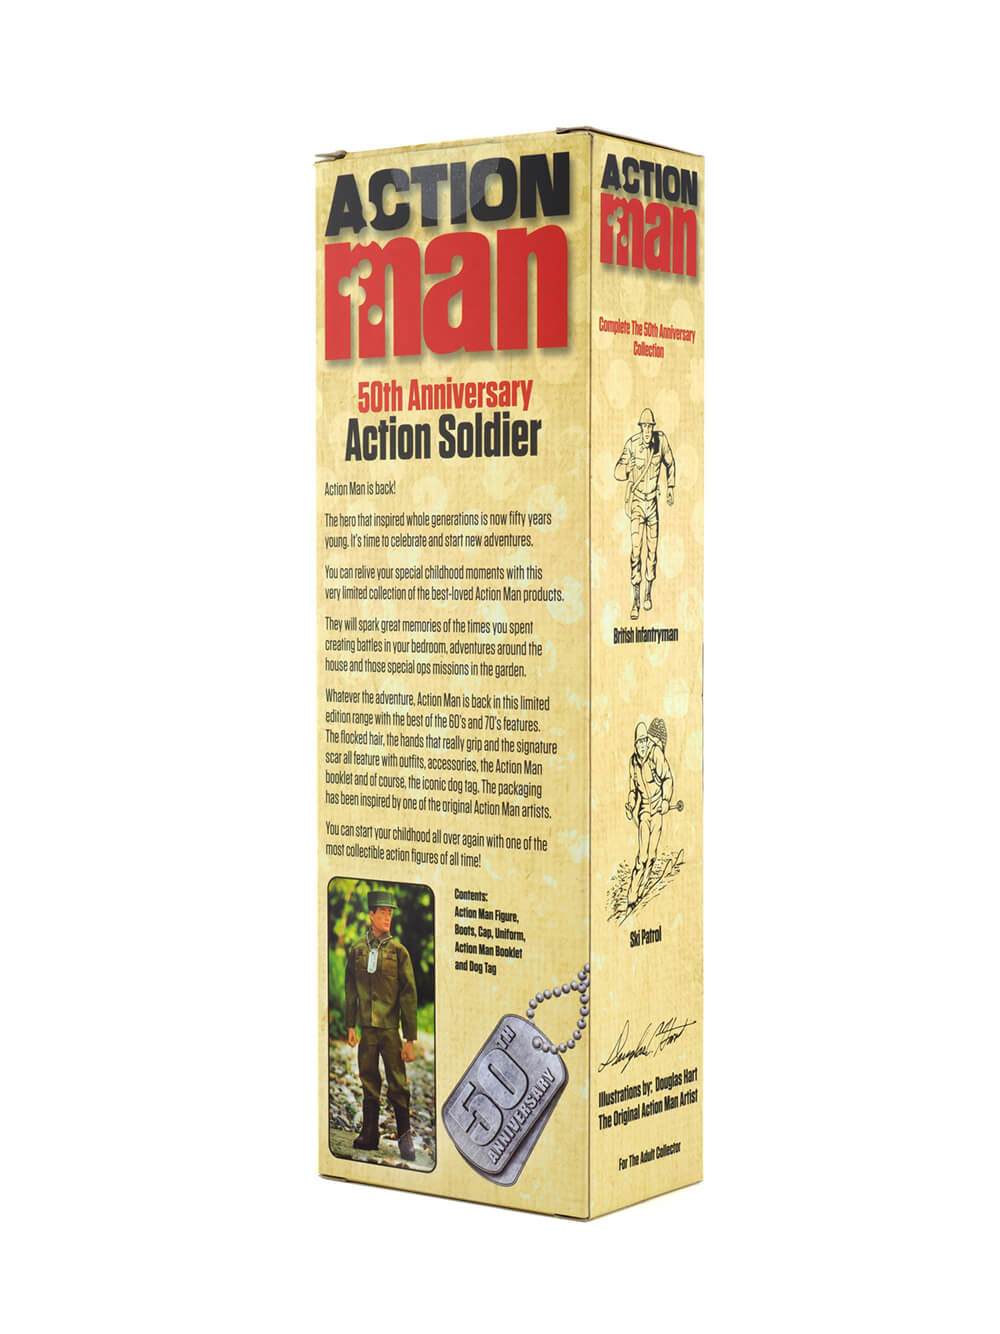 Action Man Soldier box 50th